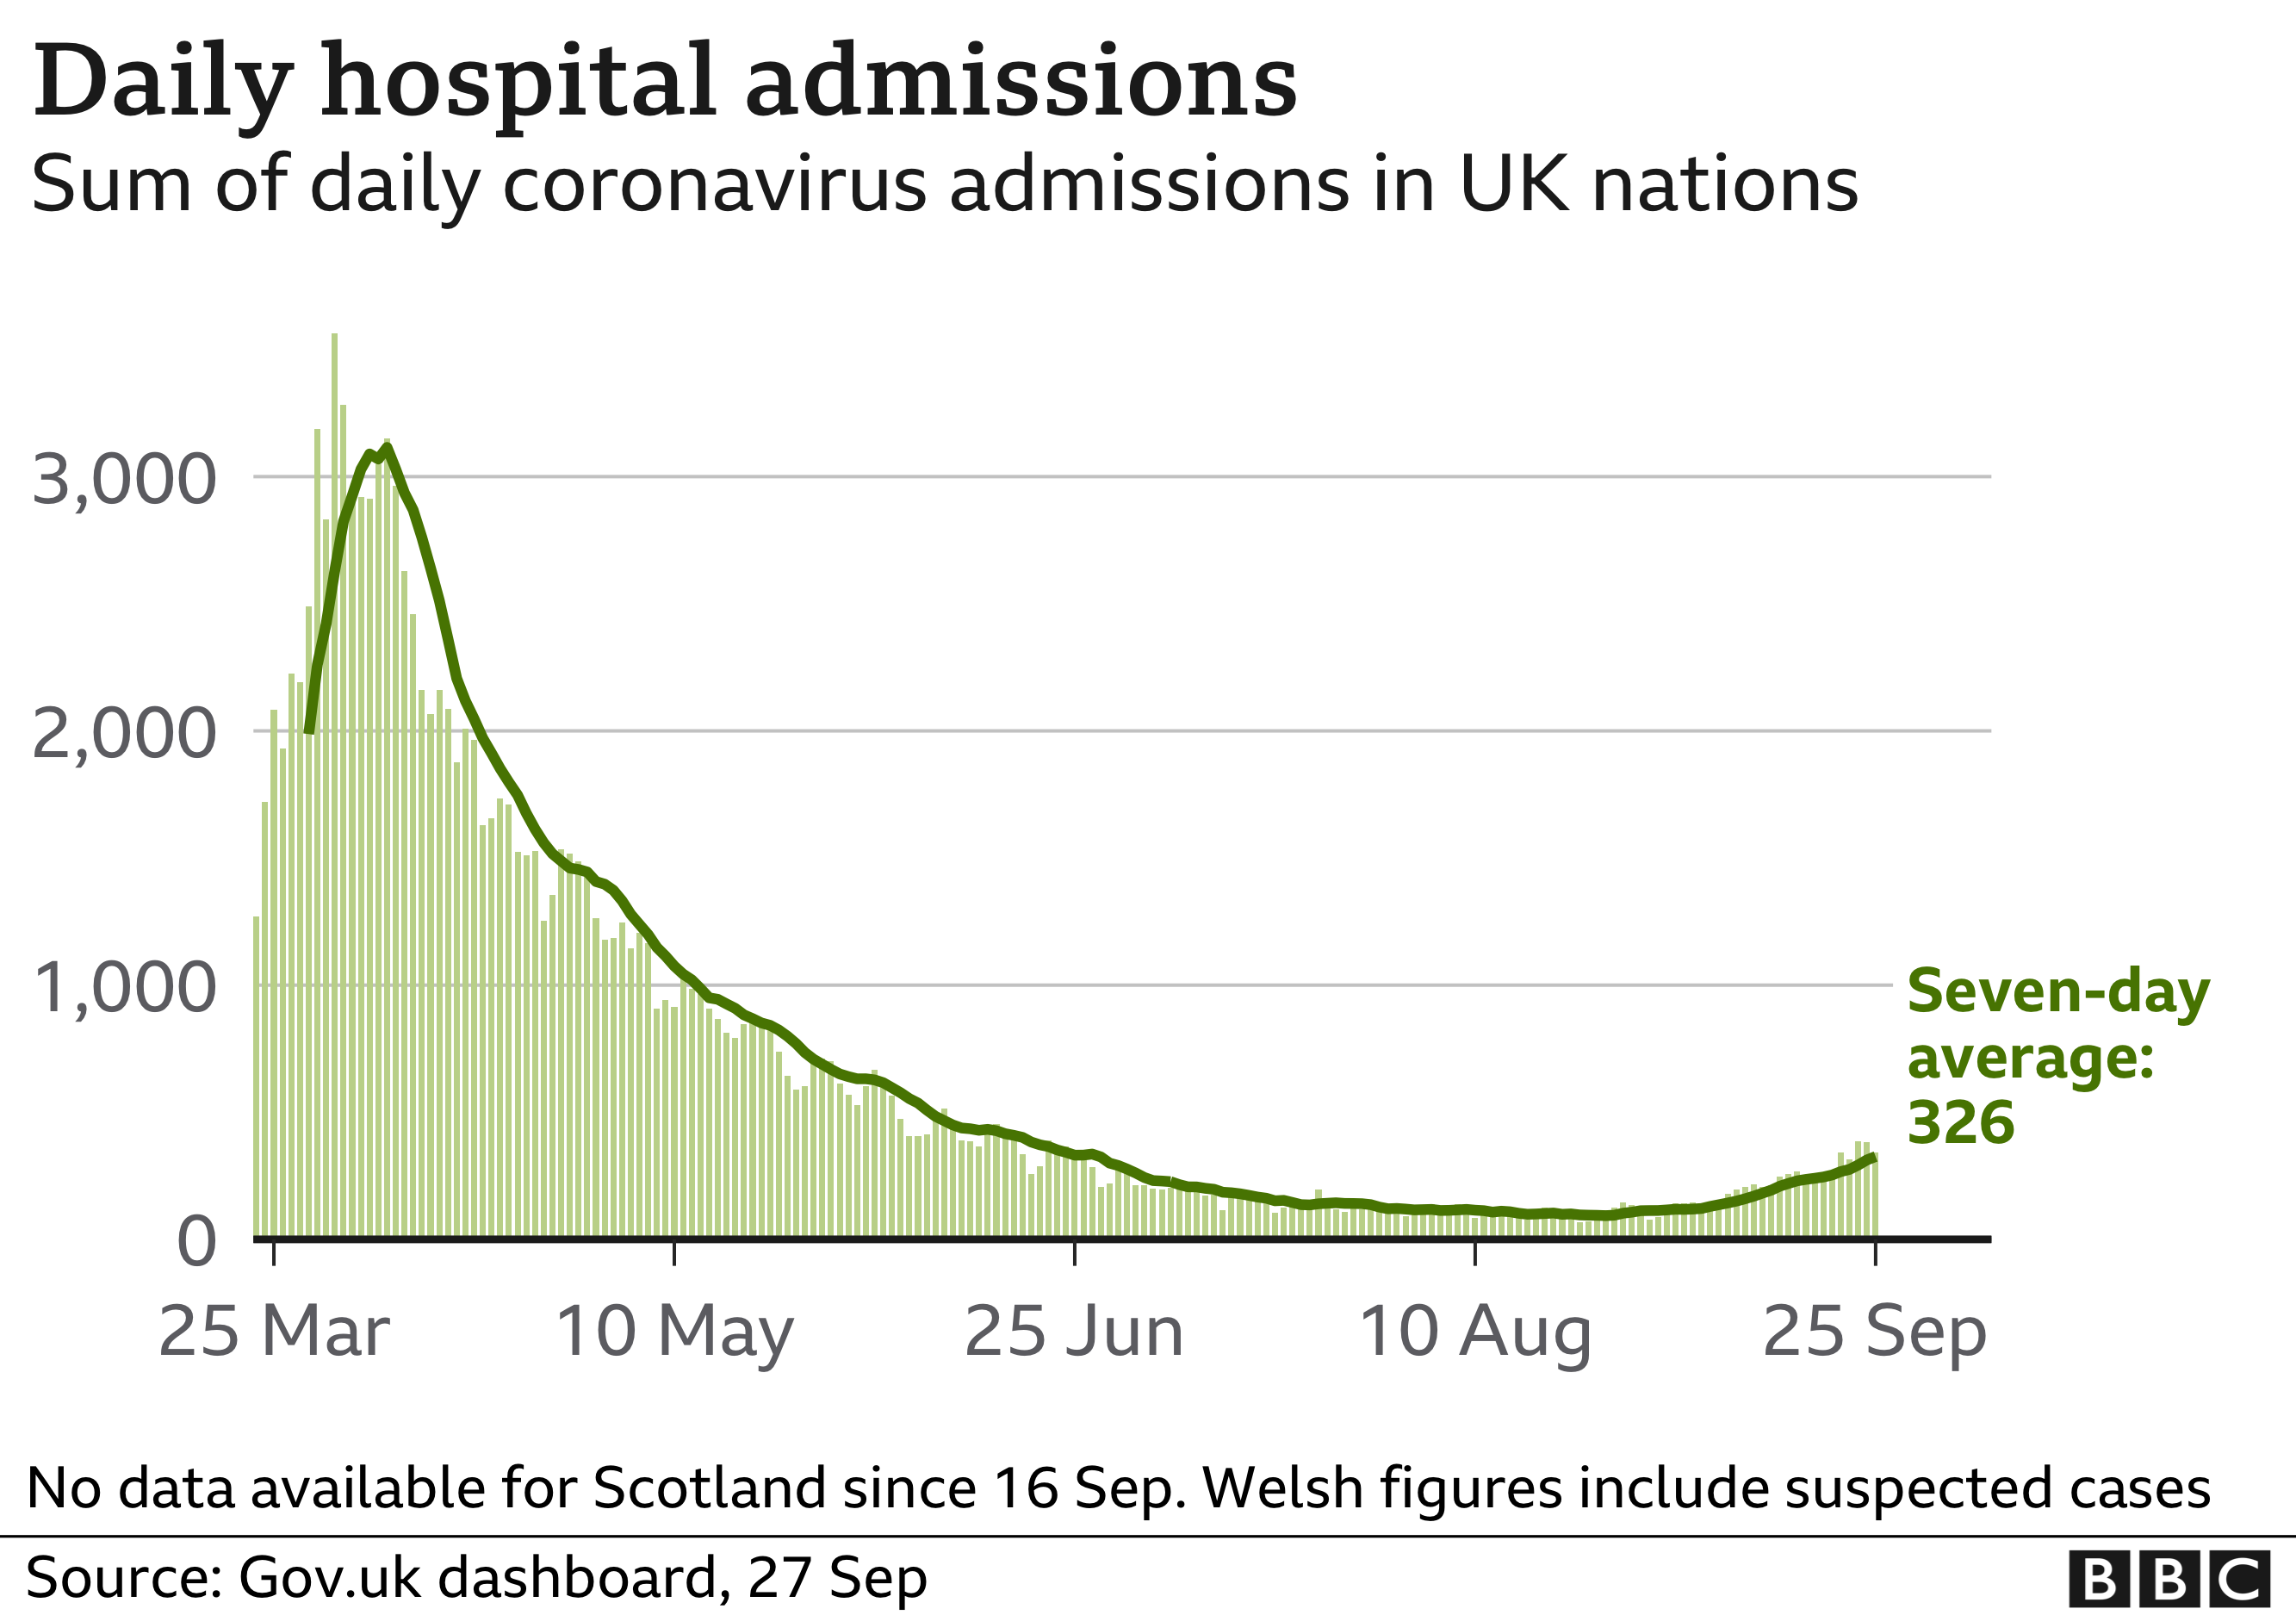 Chart shows hospital admissions are starting to rise again, although from a low level